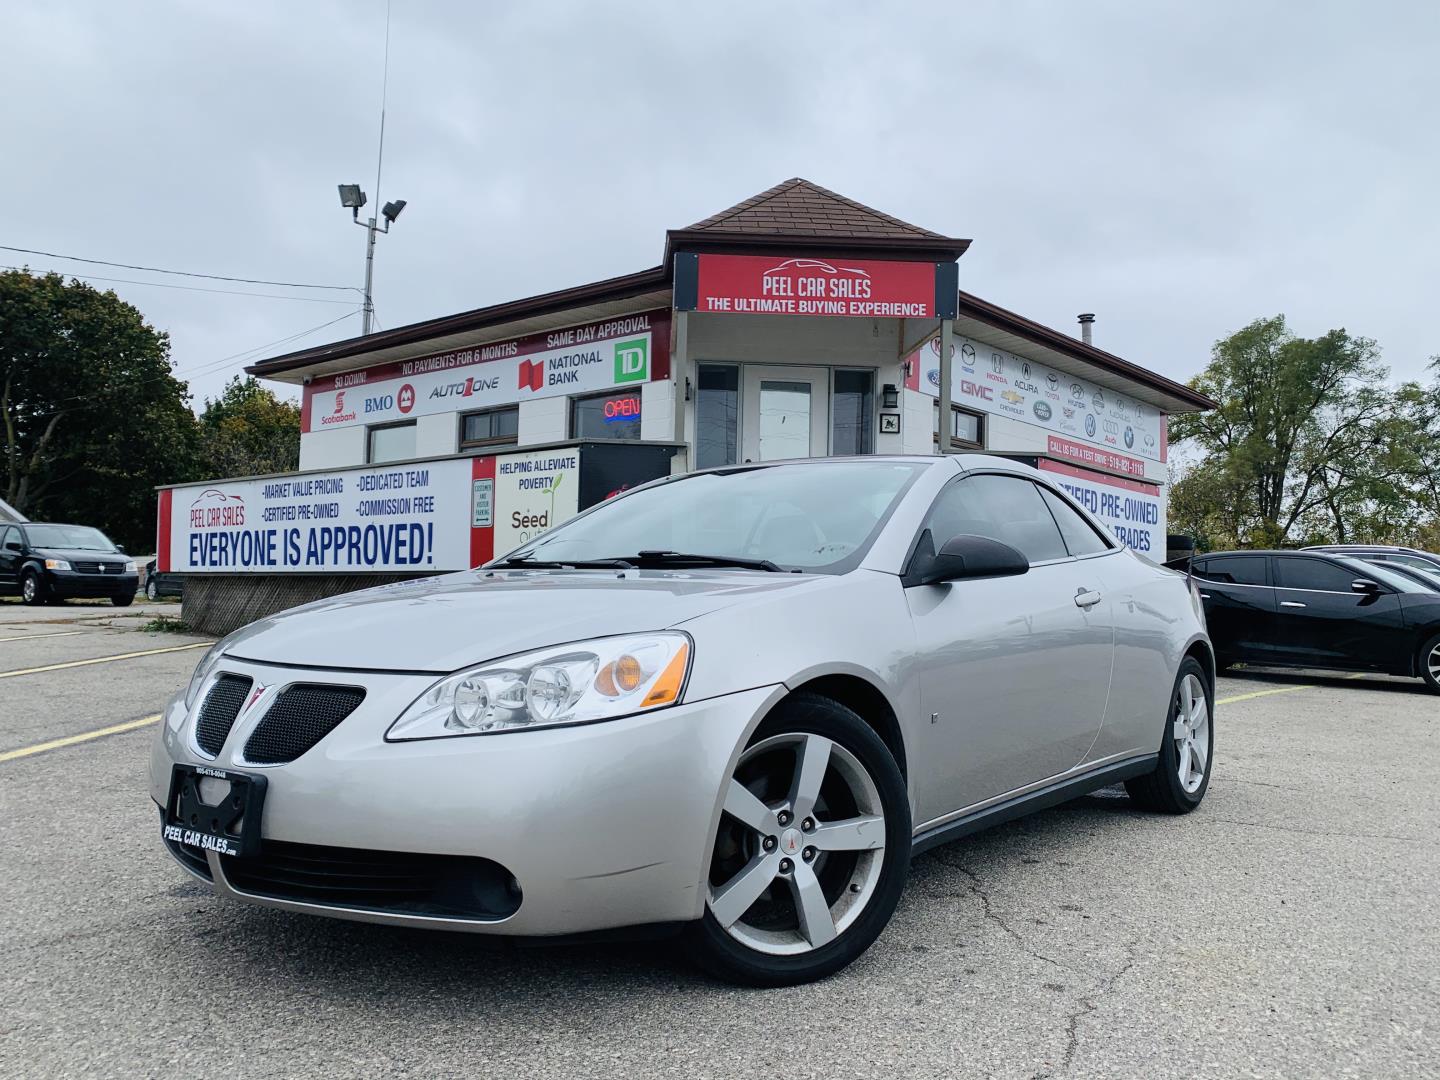 2007 Pontiac G6 G6 Gt Hardtop Convertible Remote Start Top Shape Heated Leather Seats Certified Peel Car Sales